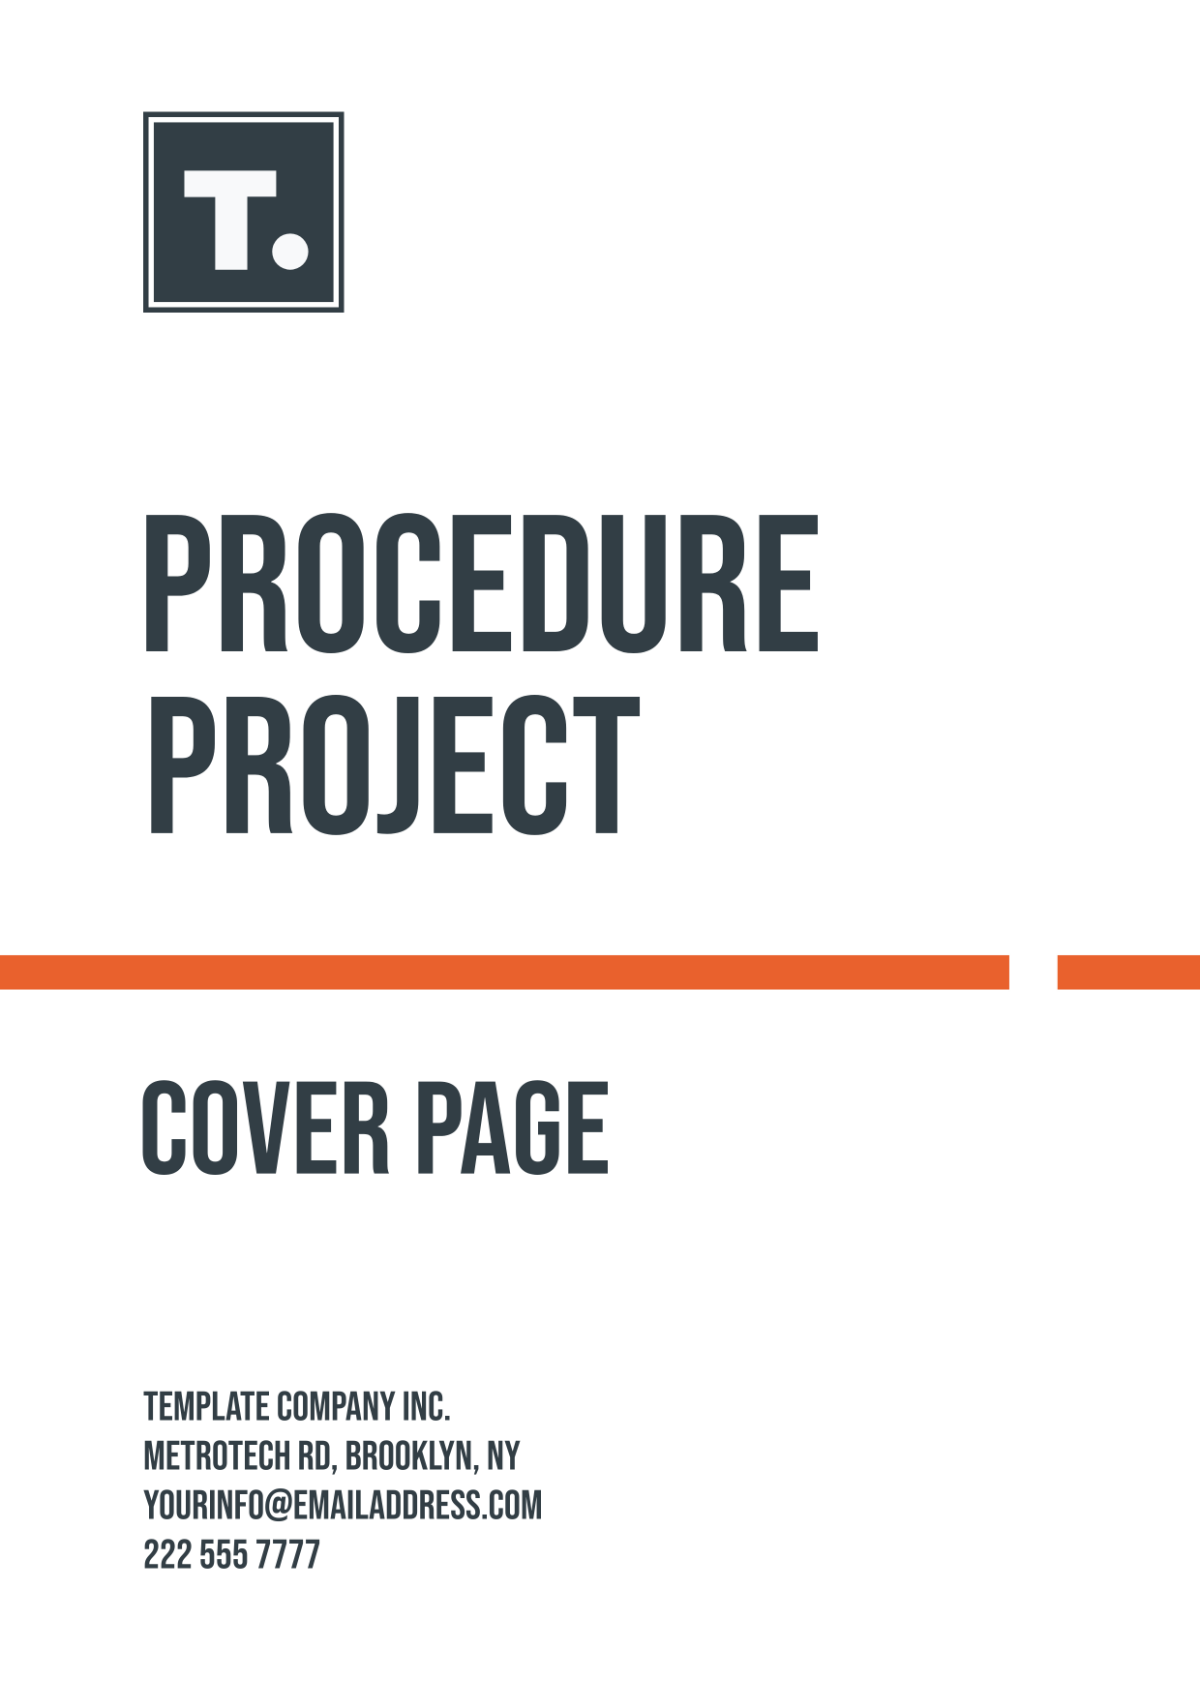 Procedure Project Cover Page